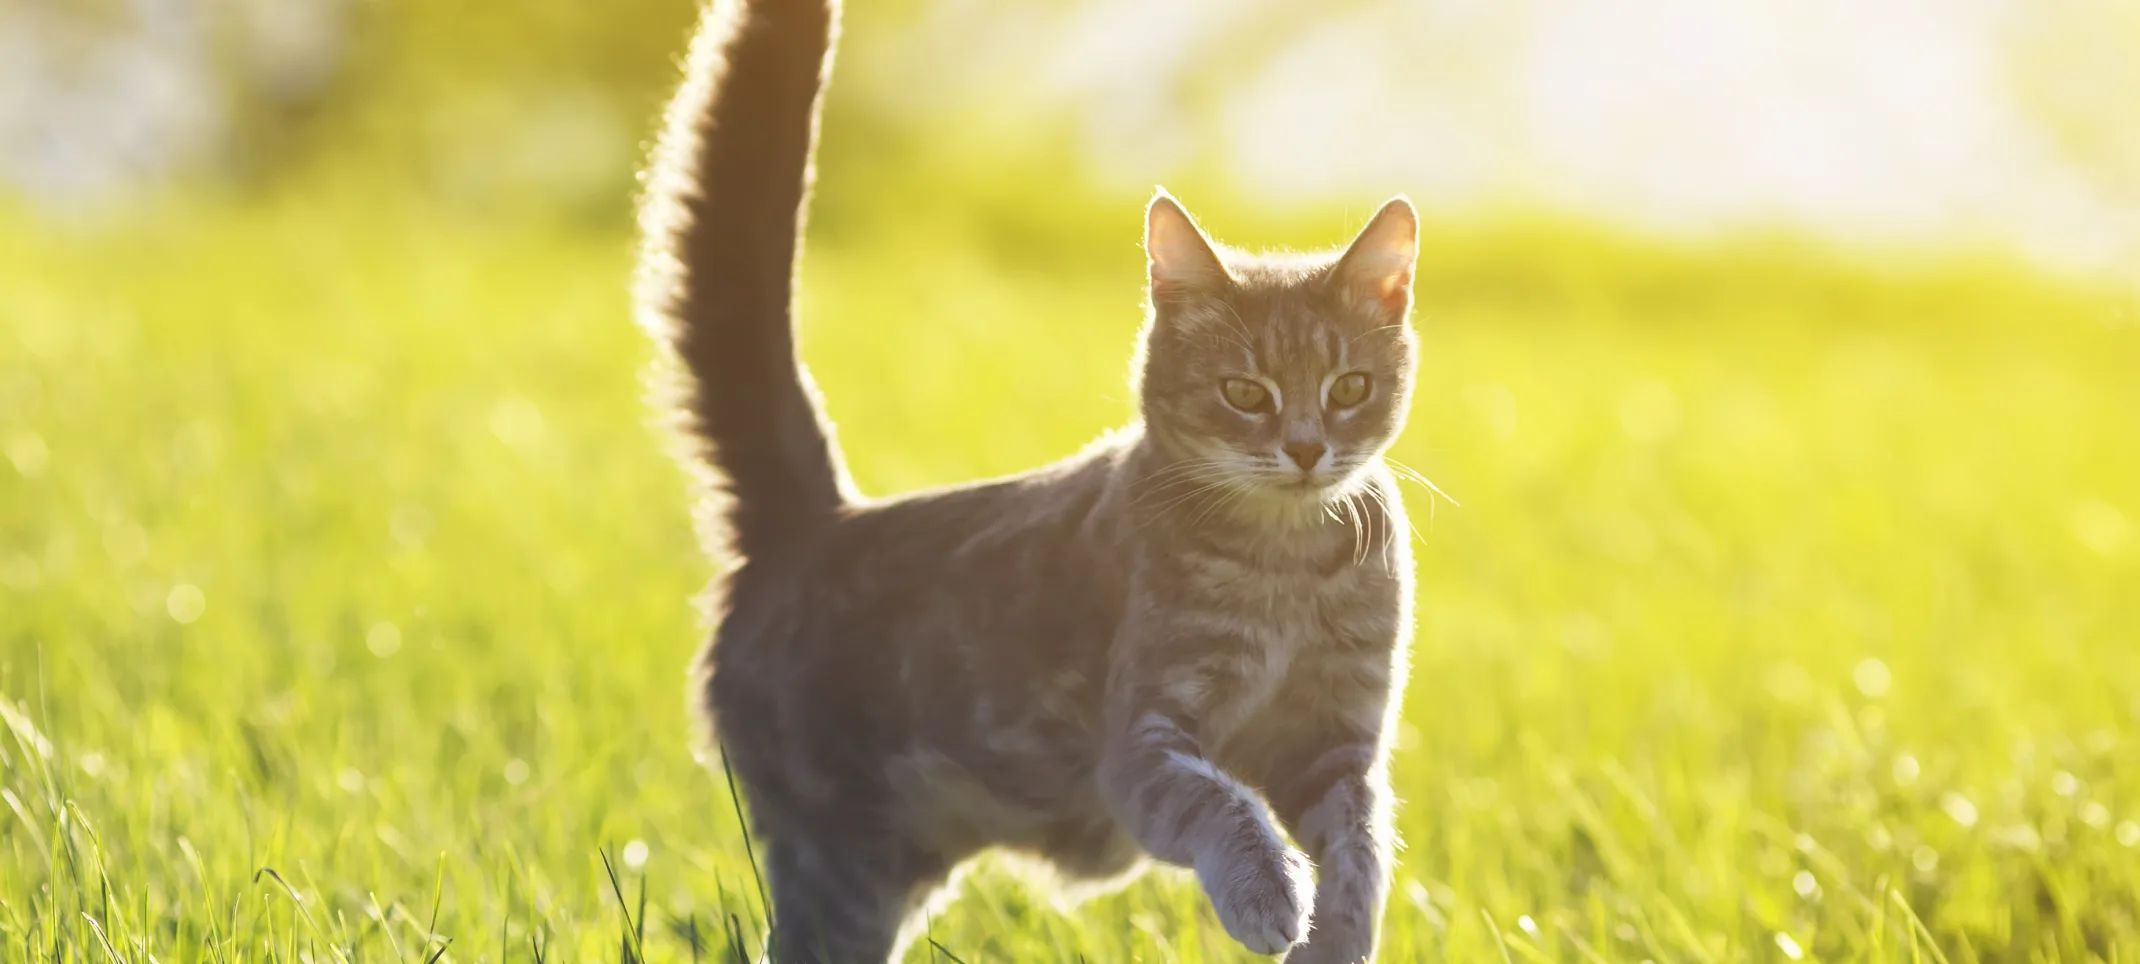 Cat jumping in the grass